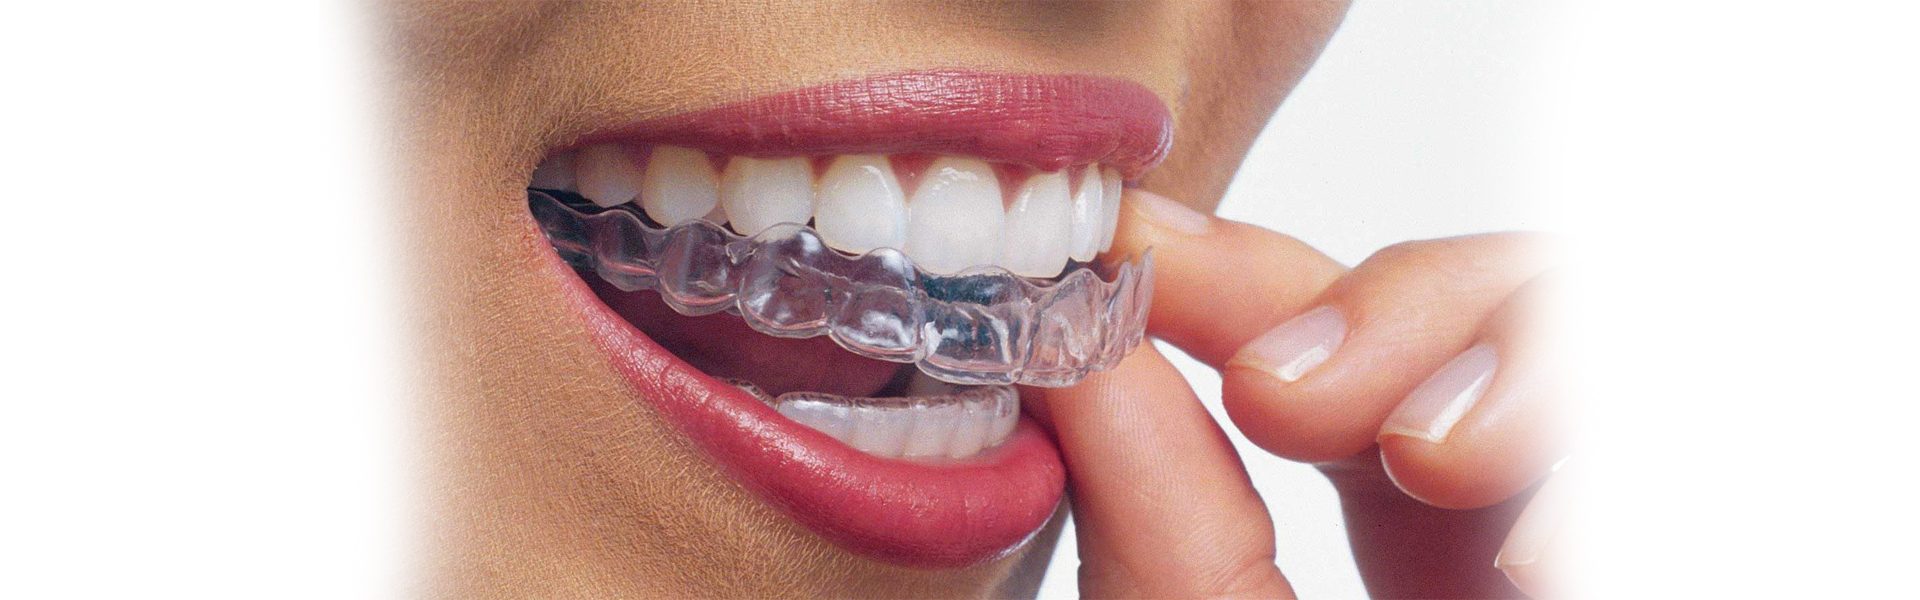 Teeth Straightening with Invisalign: How it Works